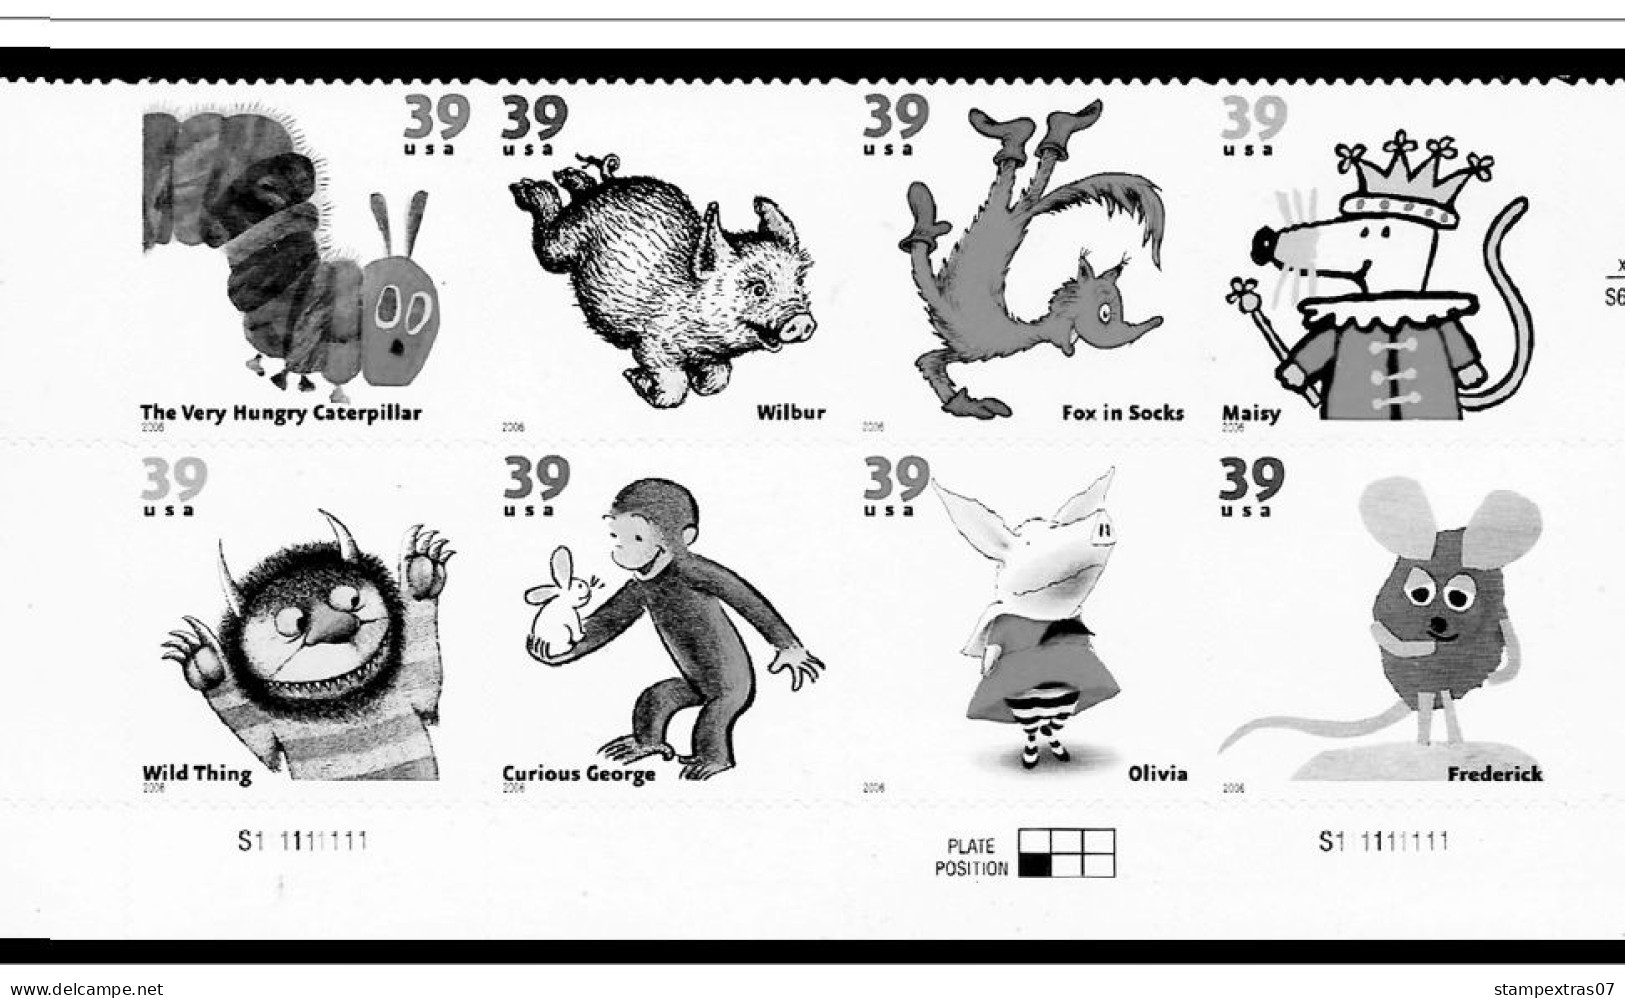 US 2006-2010 PLATE BLOCKS STAMP ALBUM PAGES (51 B&w Illustrated Pages) - Inglés